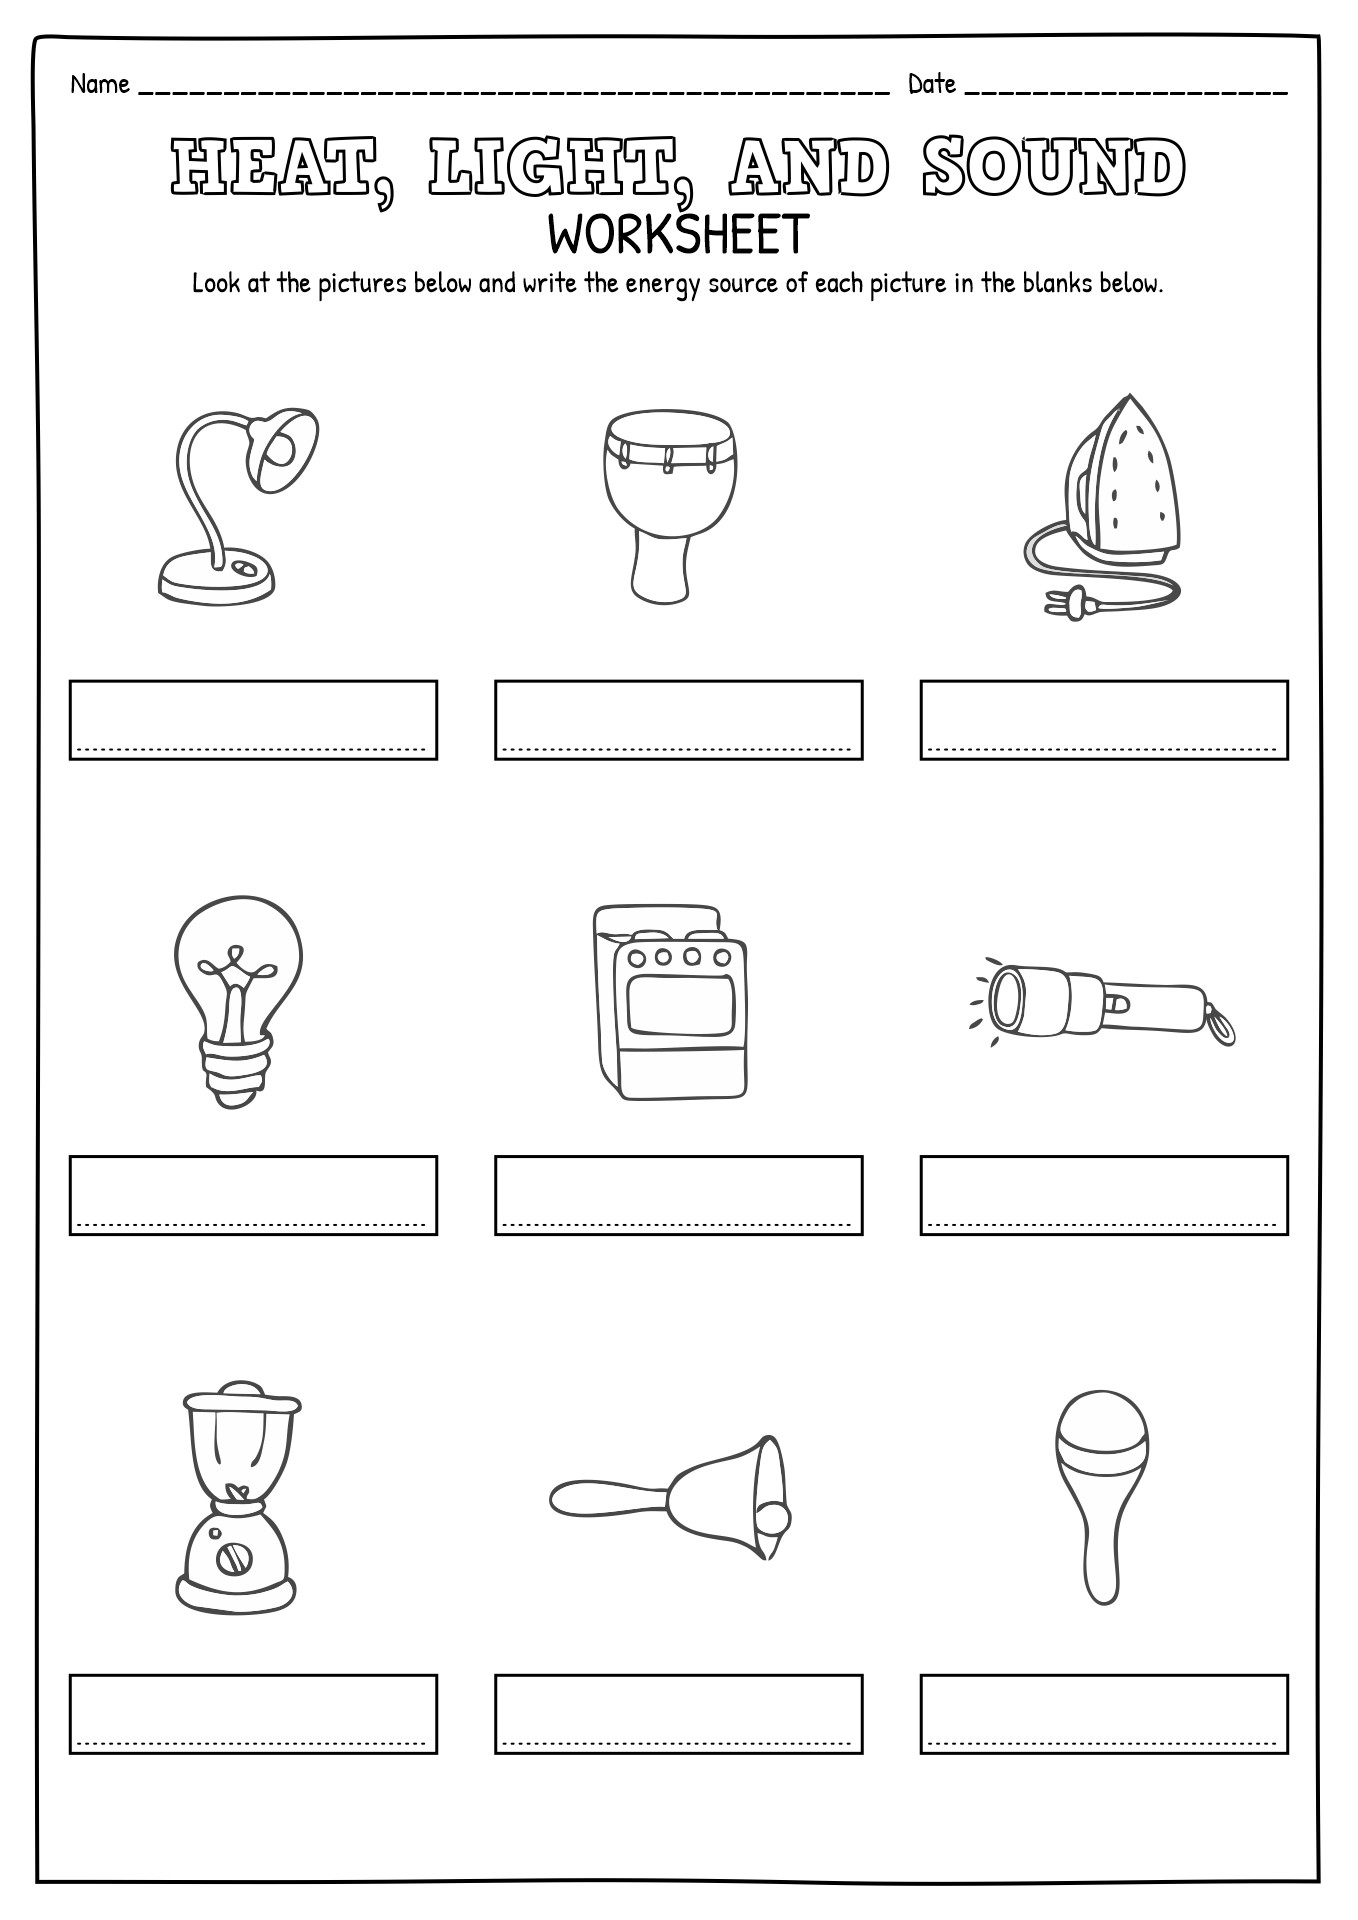 Heat Light and Sound Worksheets Image